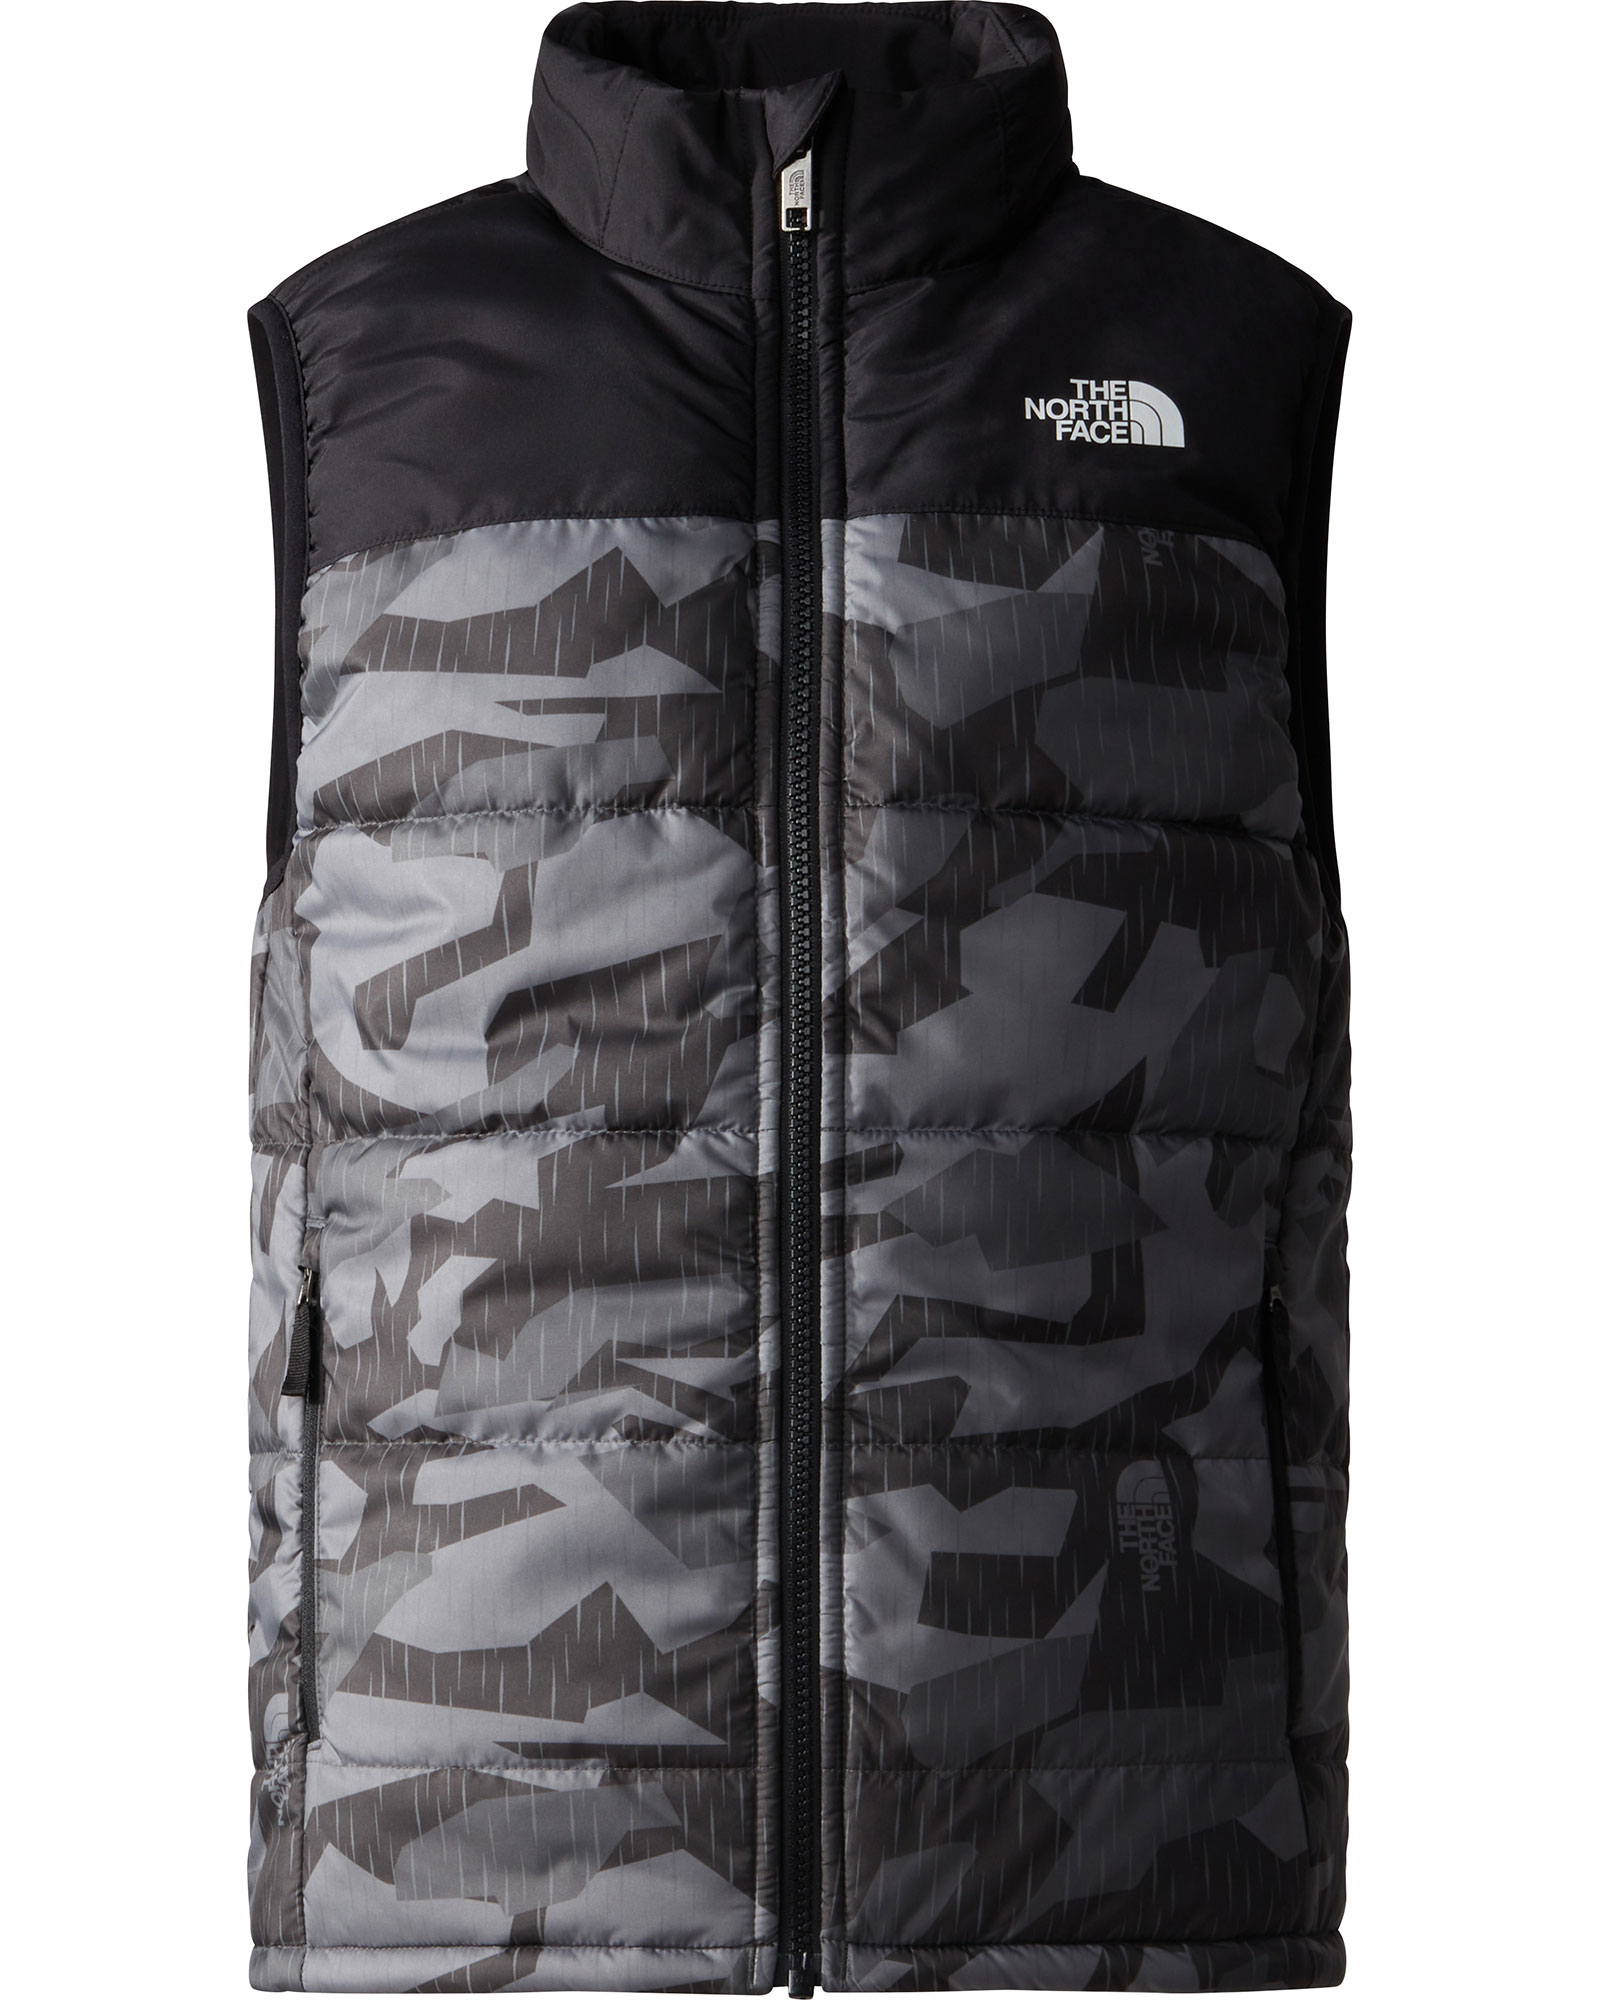 The North Face Never Stop Kids Synthetic Vest